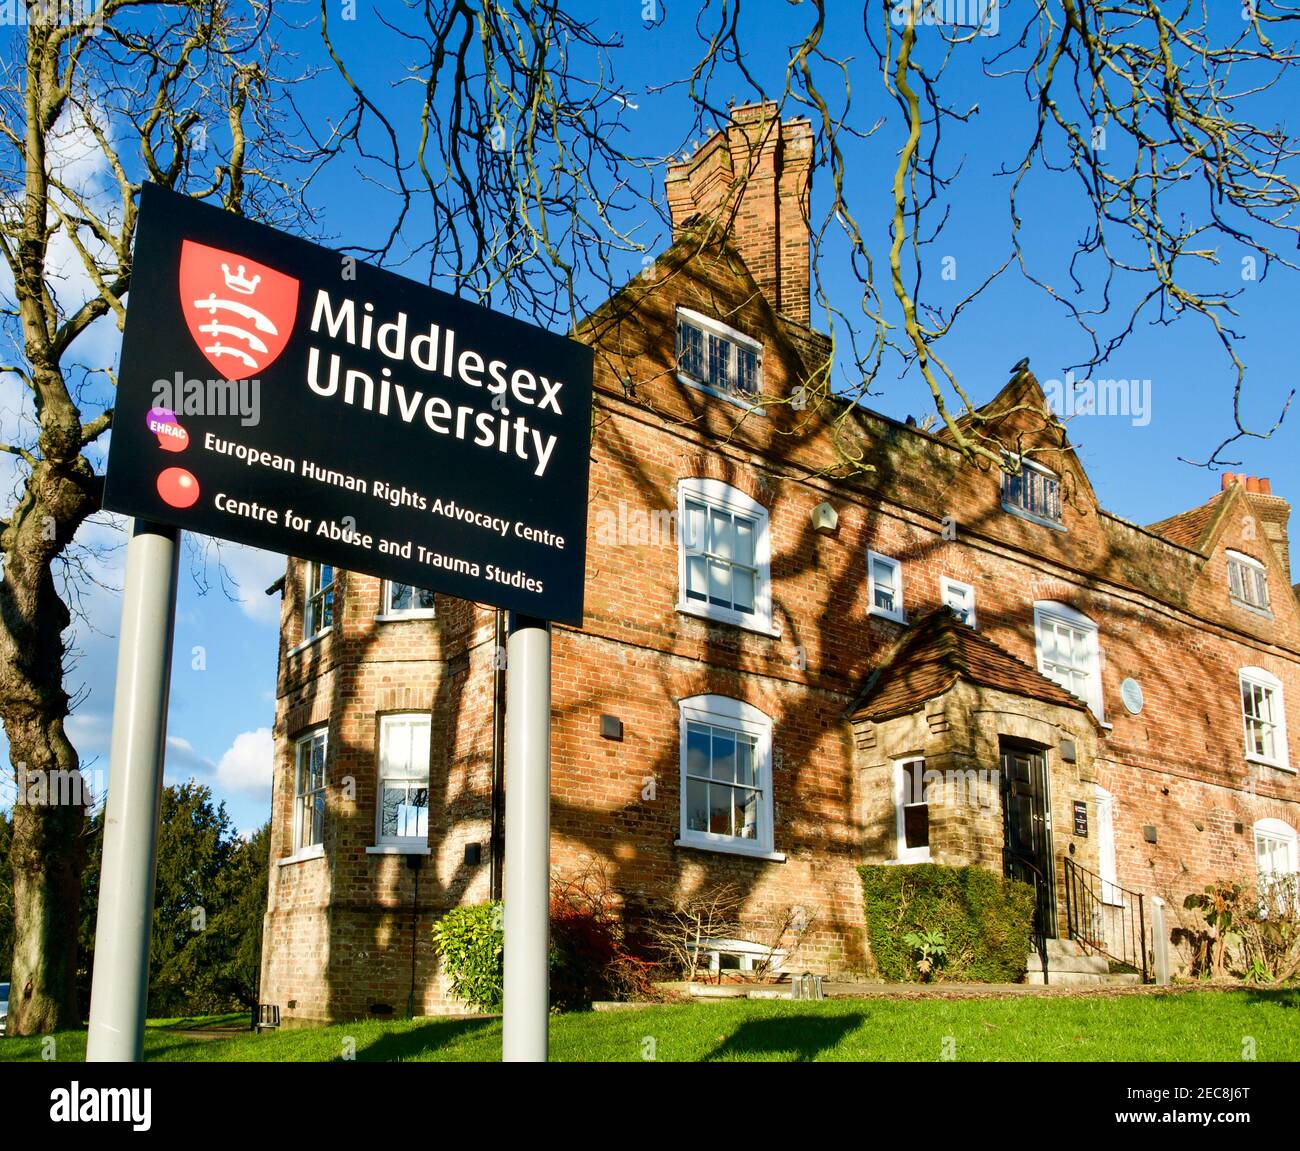 Middlesex University Building: European Human Rights Advocacy Centre and Centre for Abuse and Trauma Studies Stock Photo